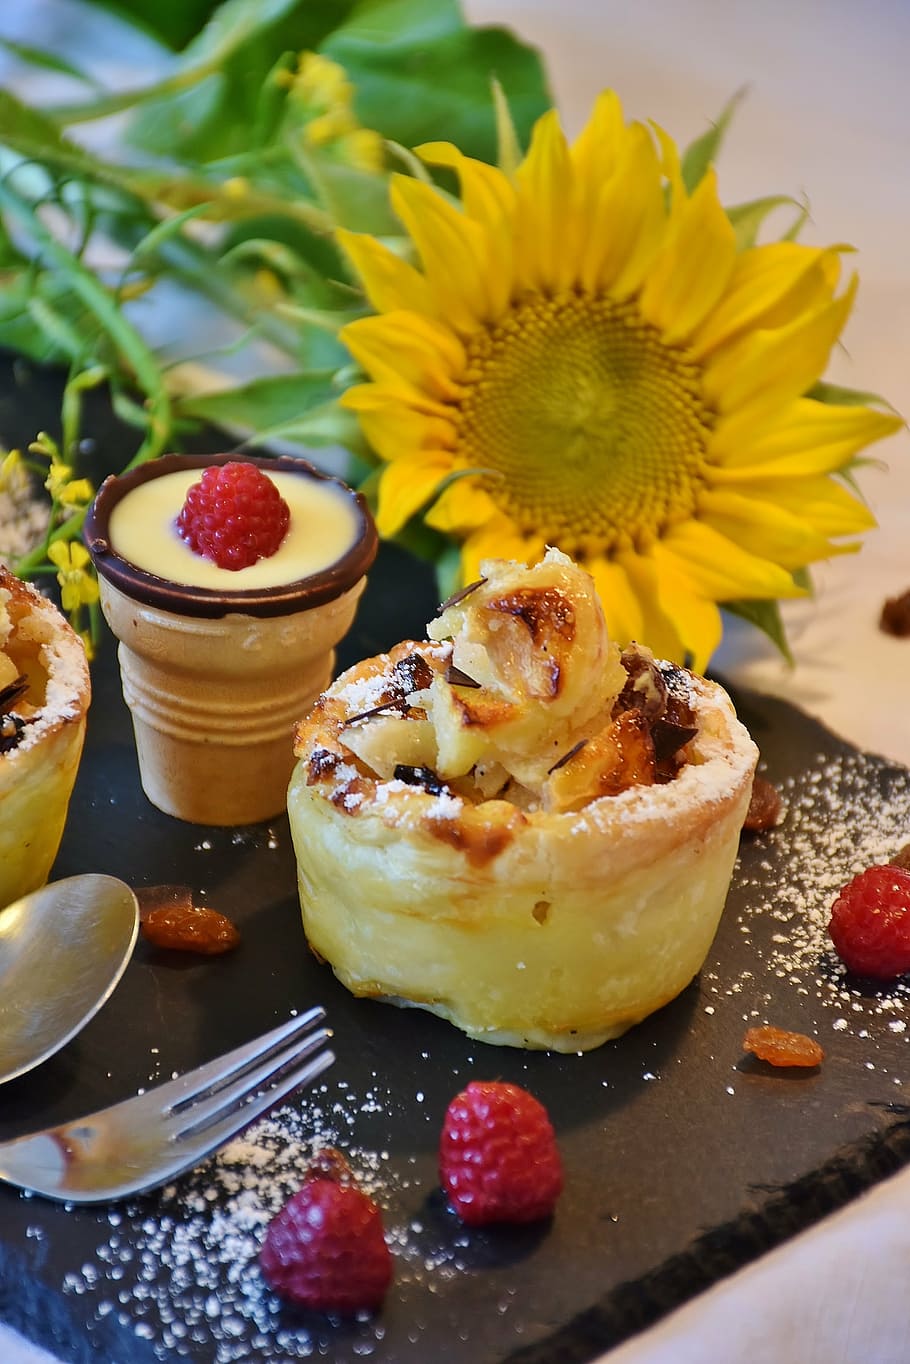 sunflower and rasberry on plate, strudel, apple strudel, apple muffin